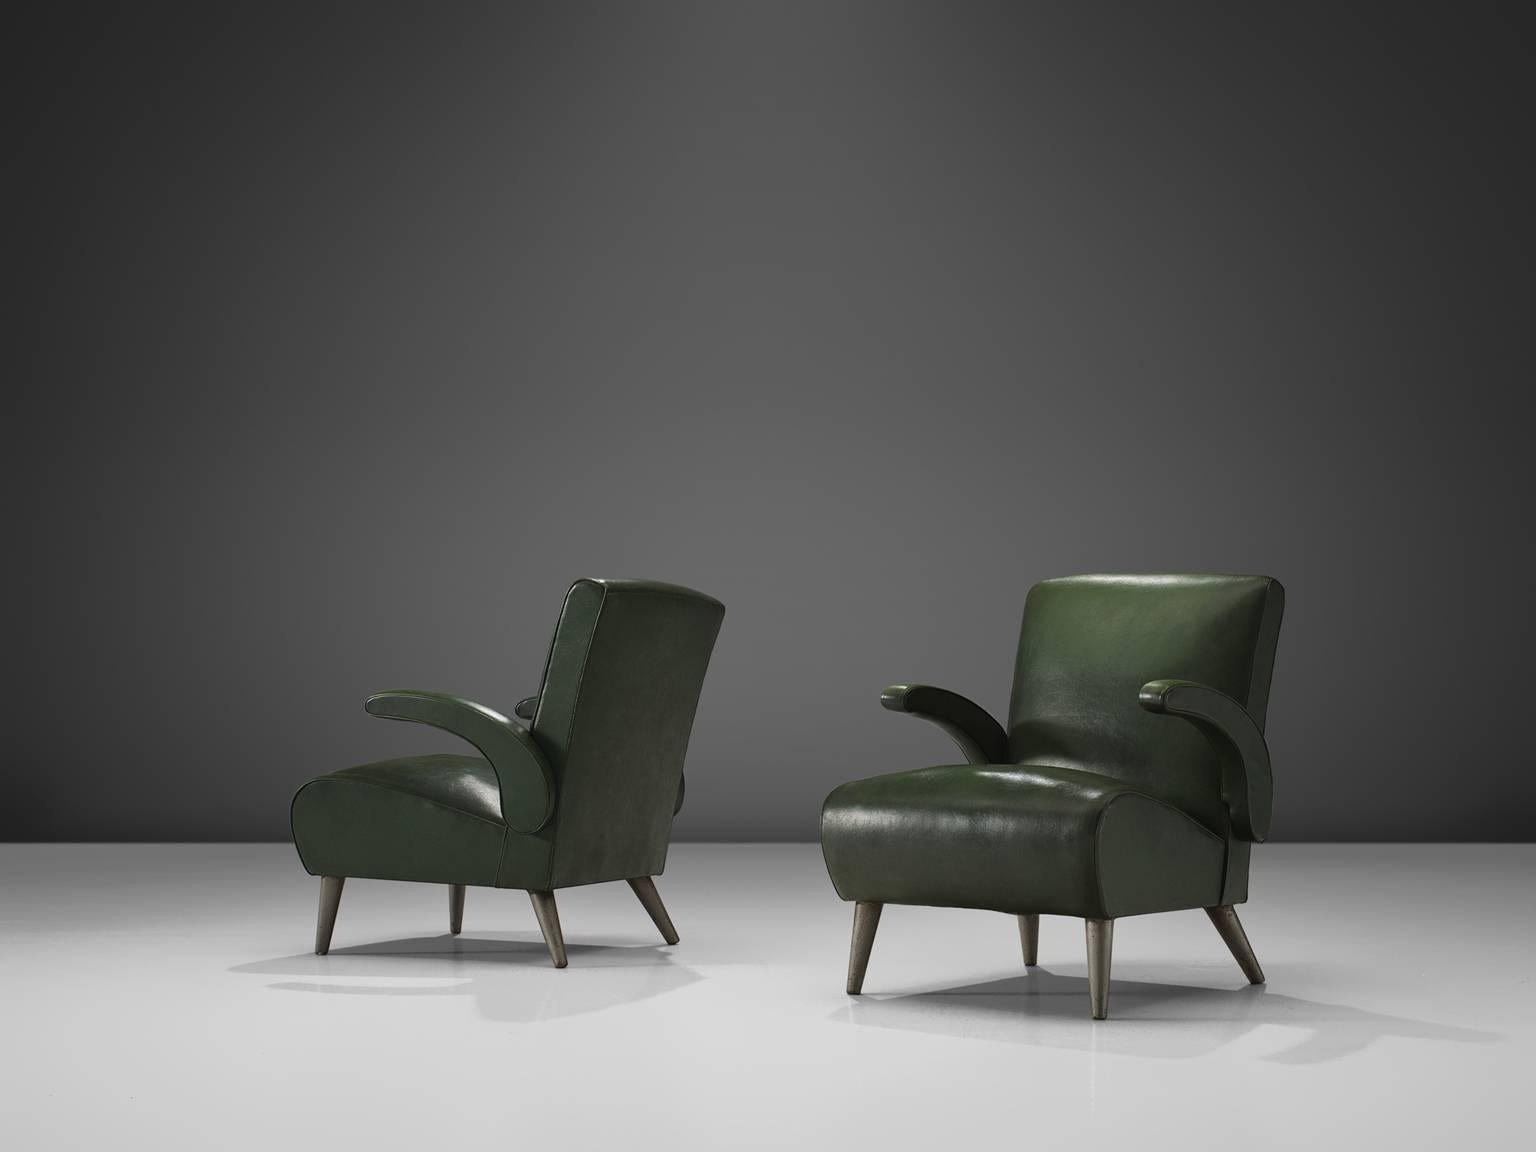 Easy chairs, in green faux-leather and chrome metal legs, Italy, 1950s. 

These mid-modern armchairs are executed in a dark green leatherette. The comfortable easy chairs show voluptuous, round lines. The most iconic feature of this set are the